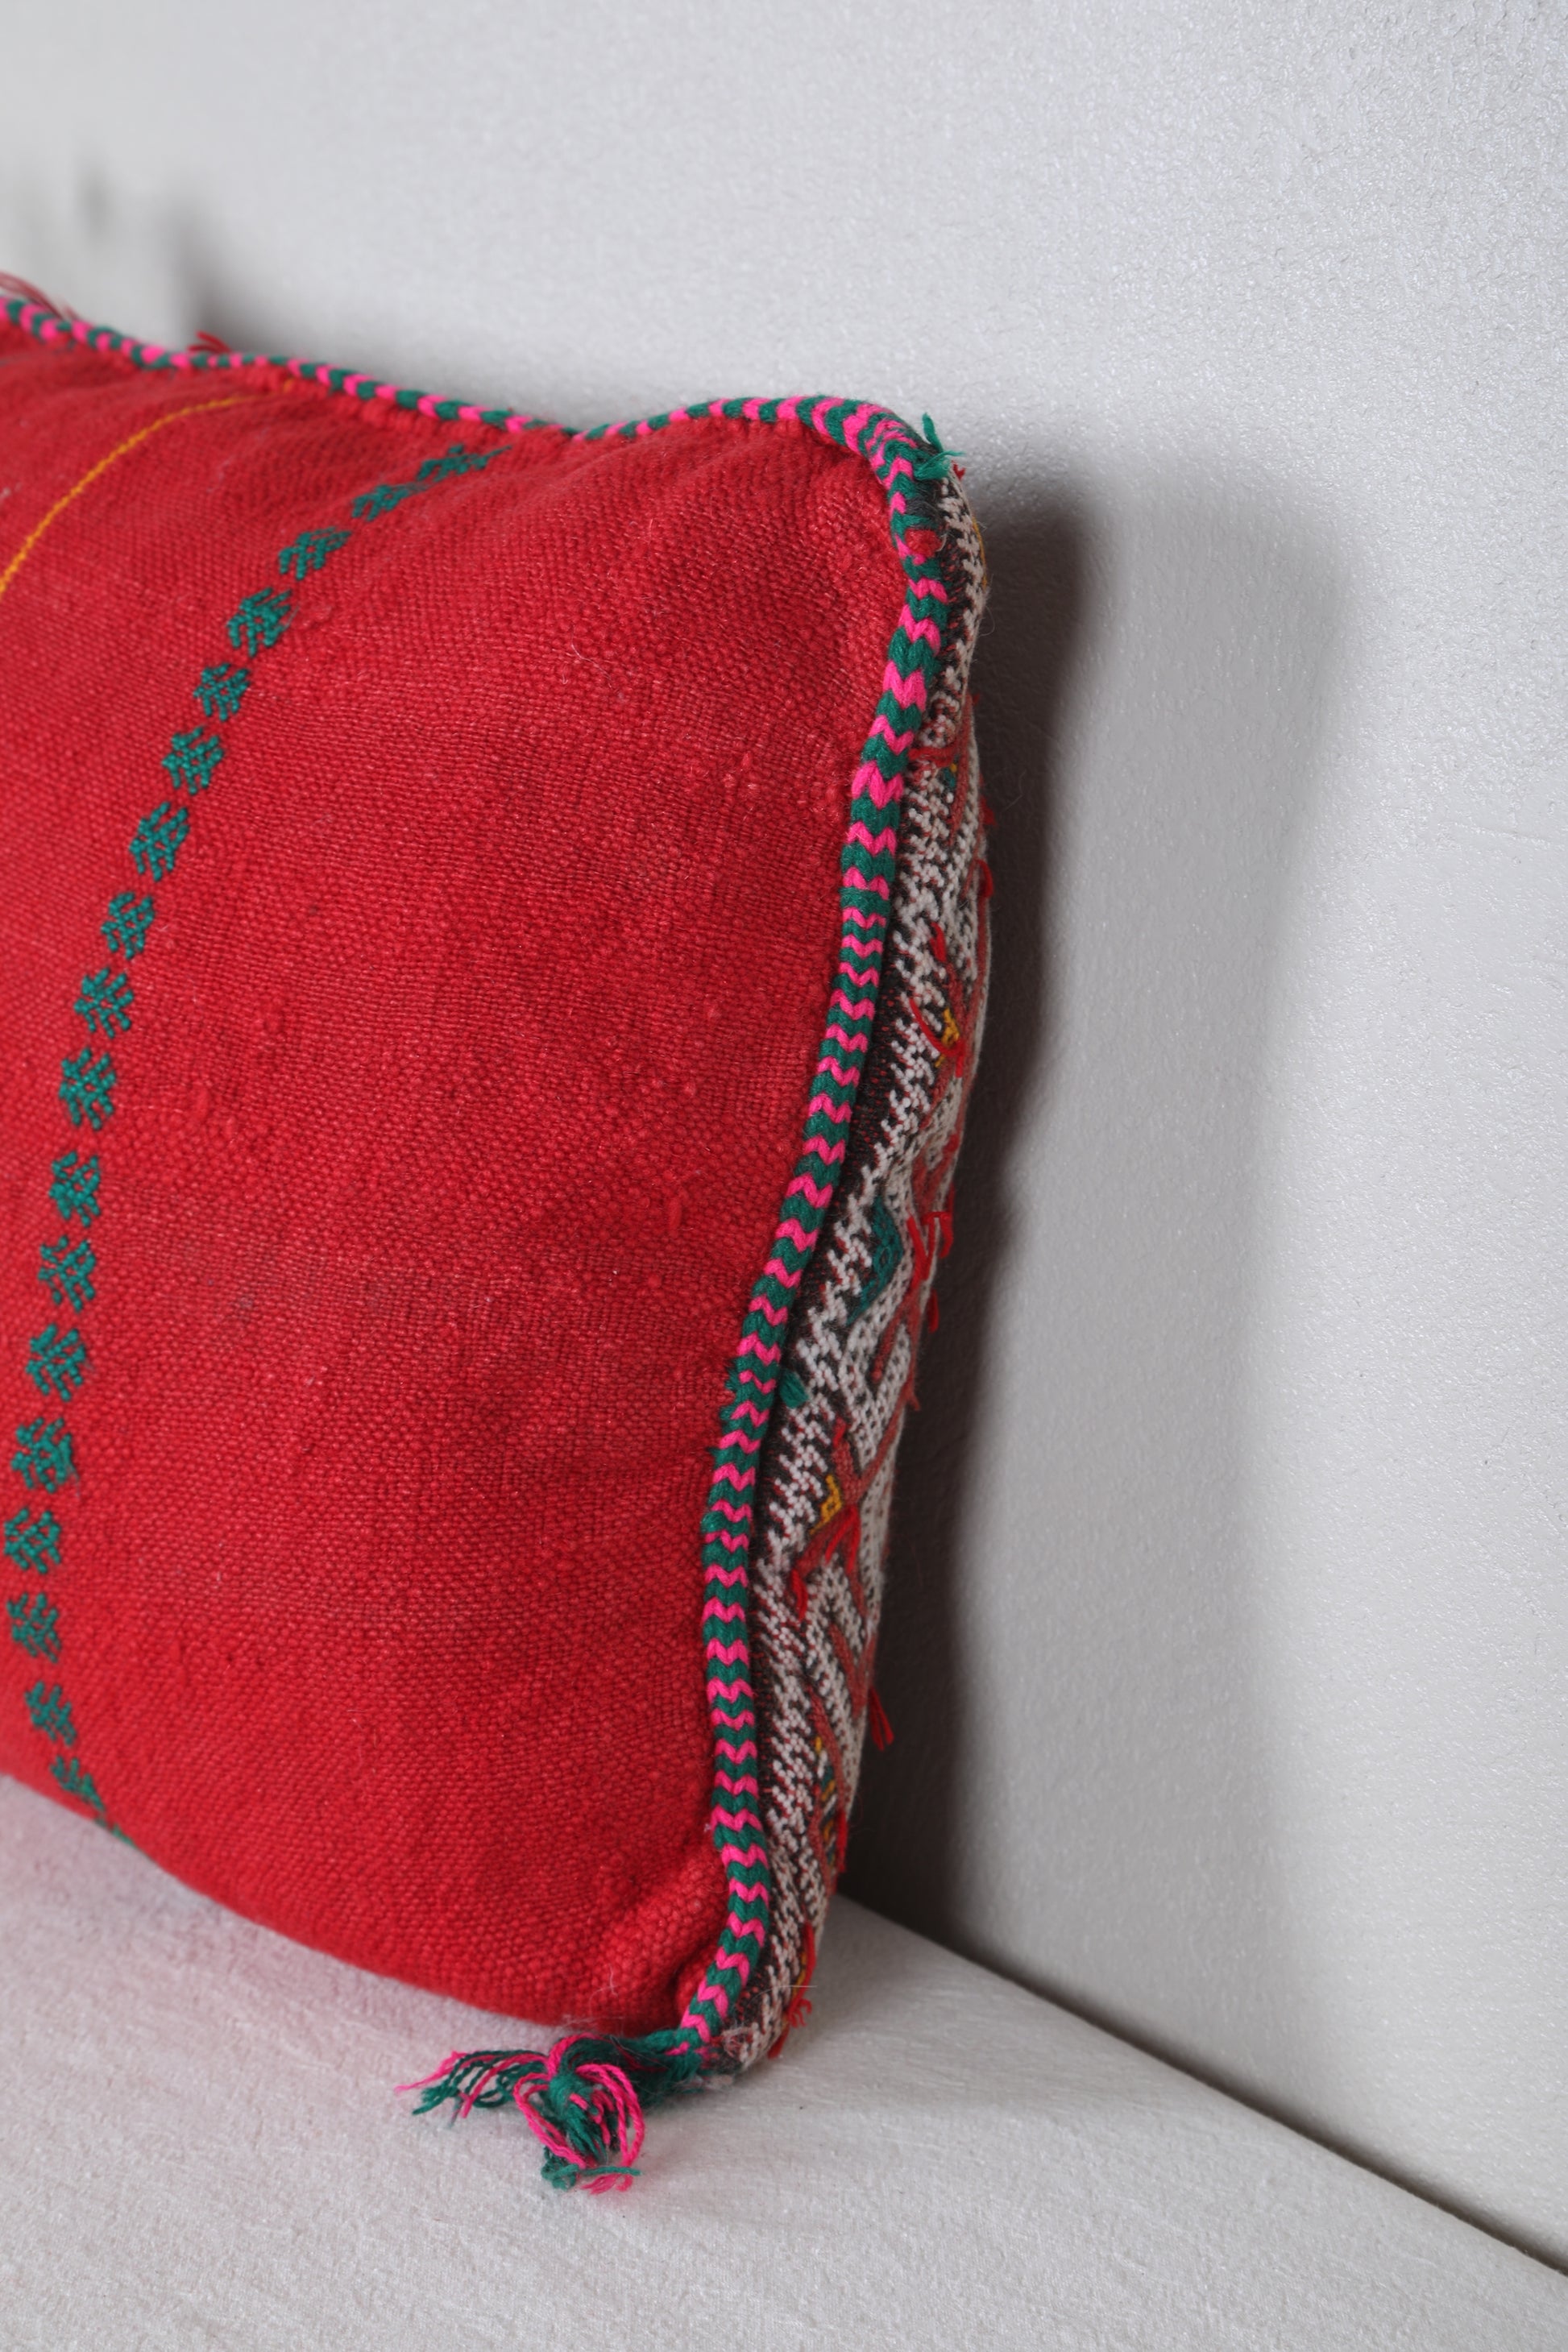 Vintage Moroccan Pillow 14.9 INCHES X 16.9 INCHES